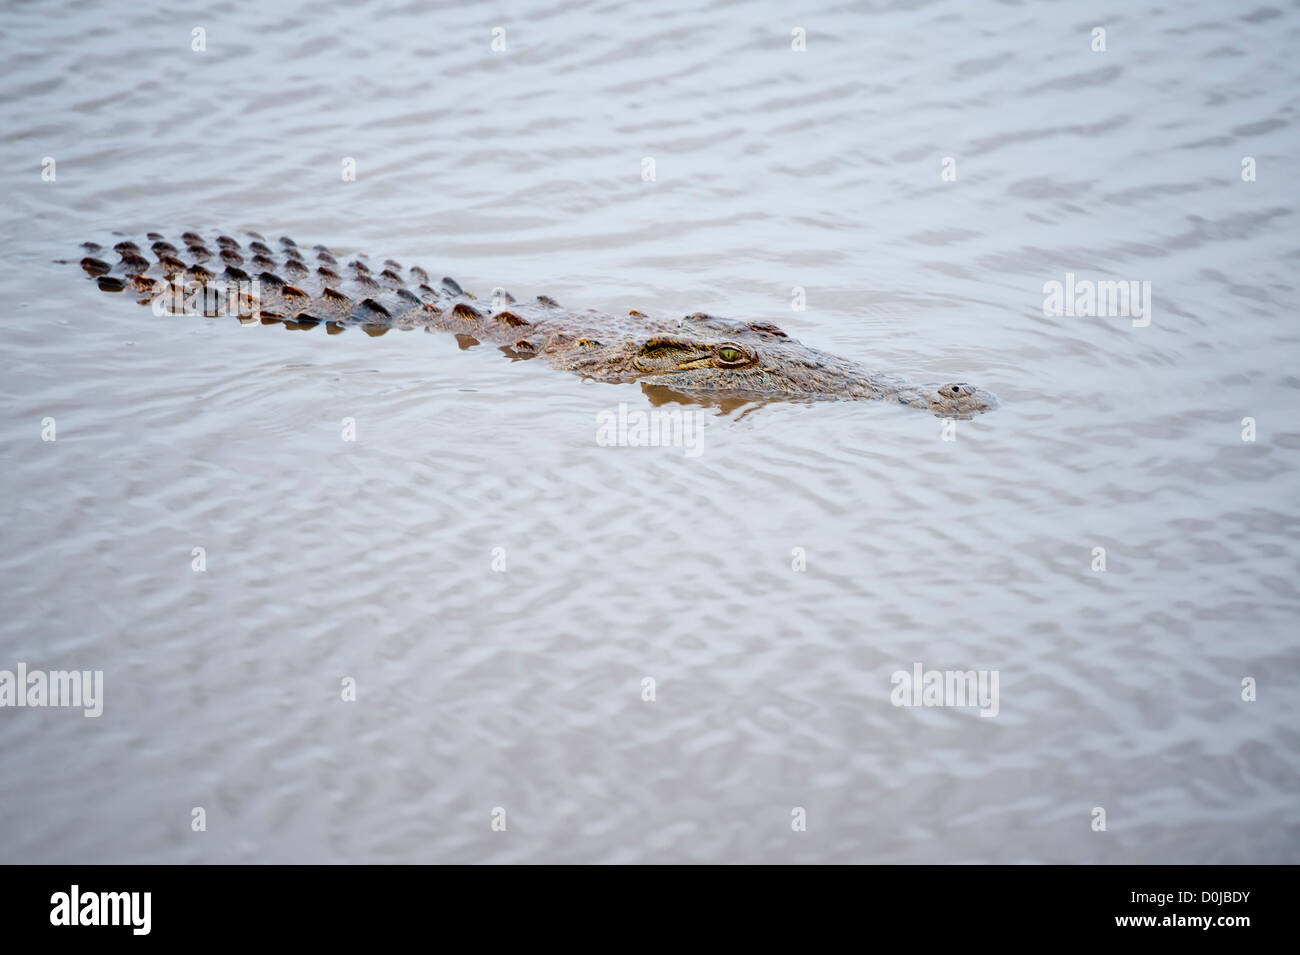 An African crocodile, partly submerged in the water Stock Photo